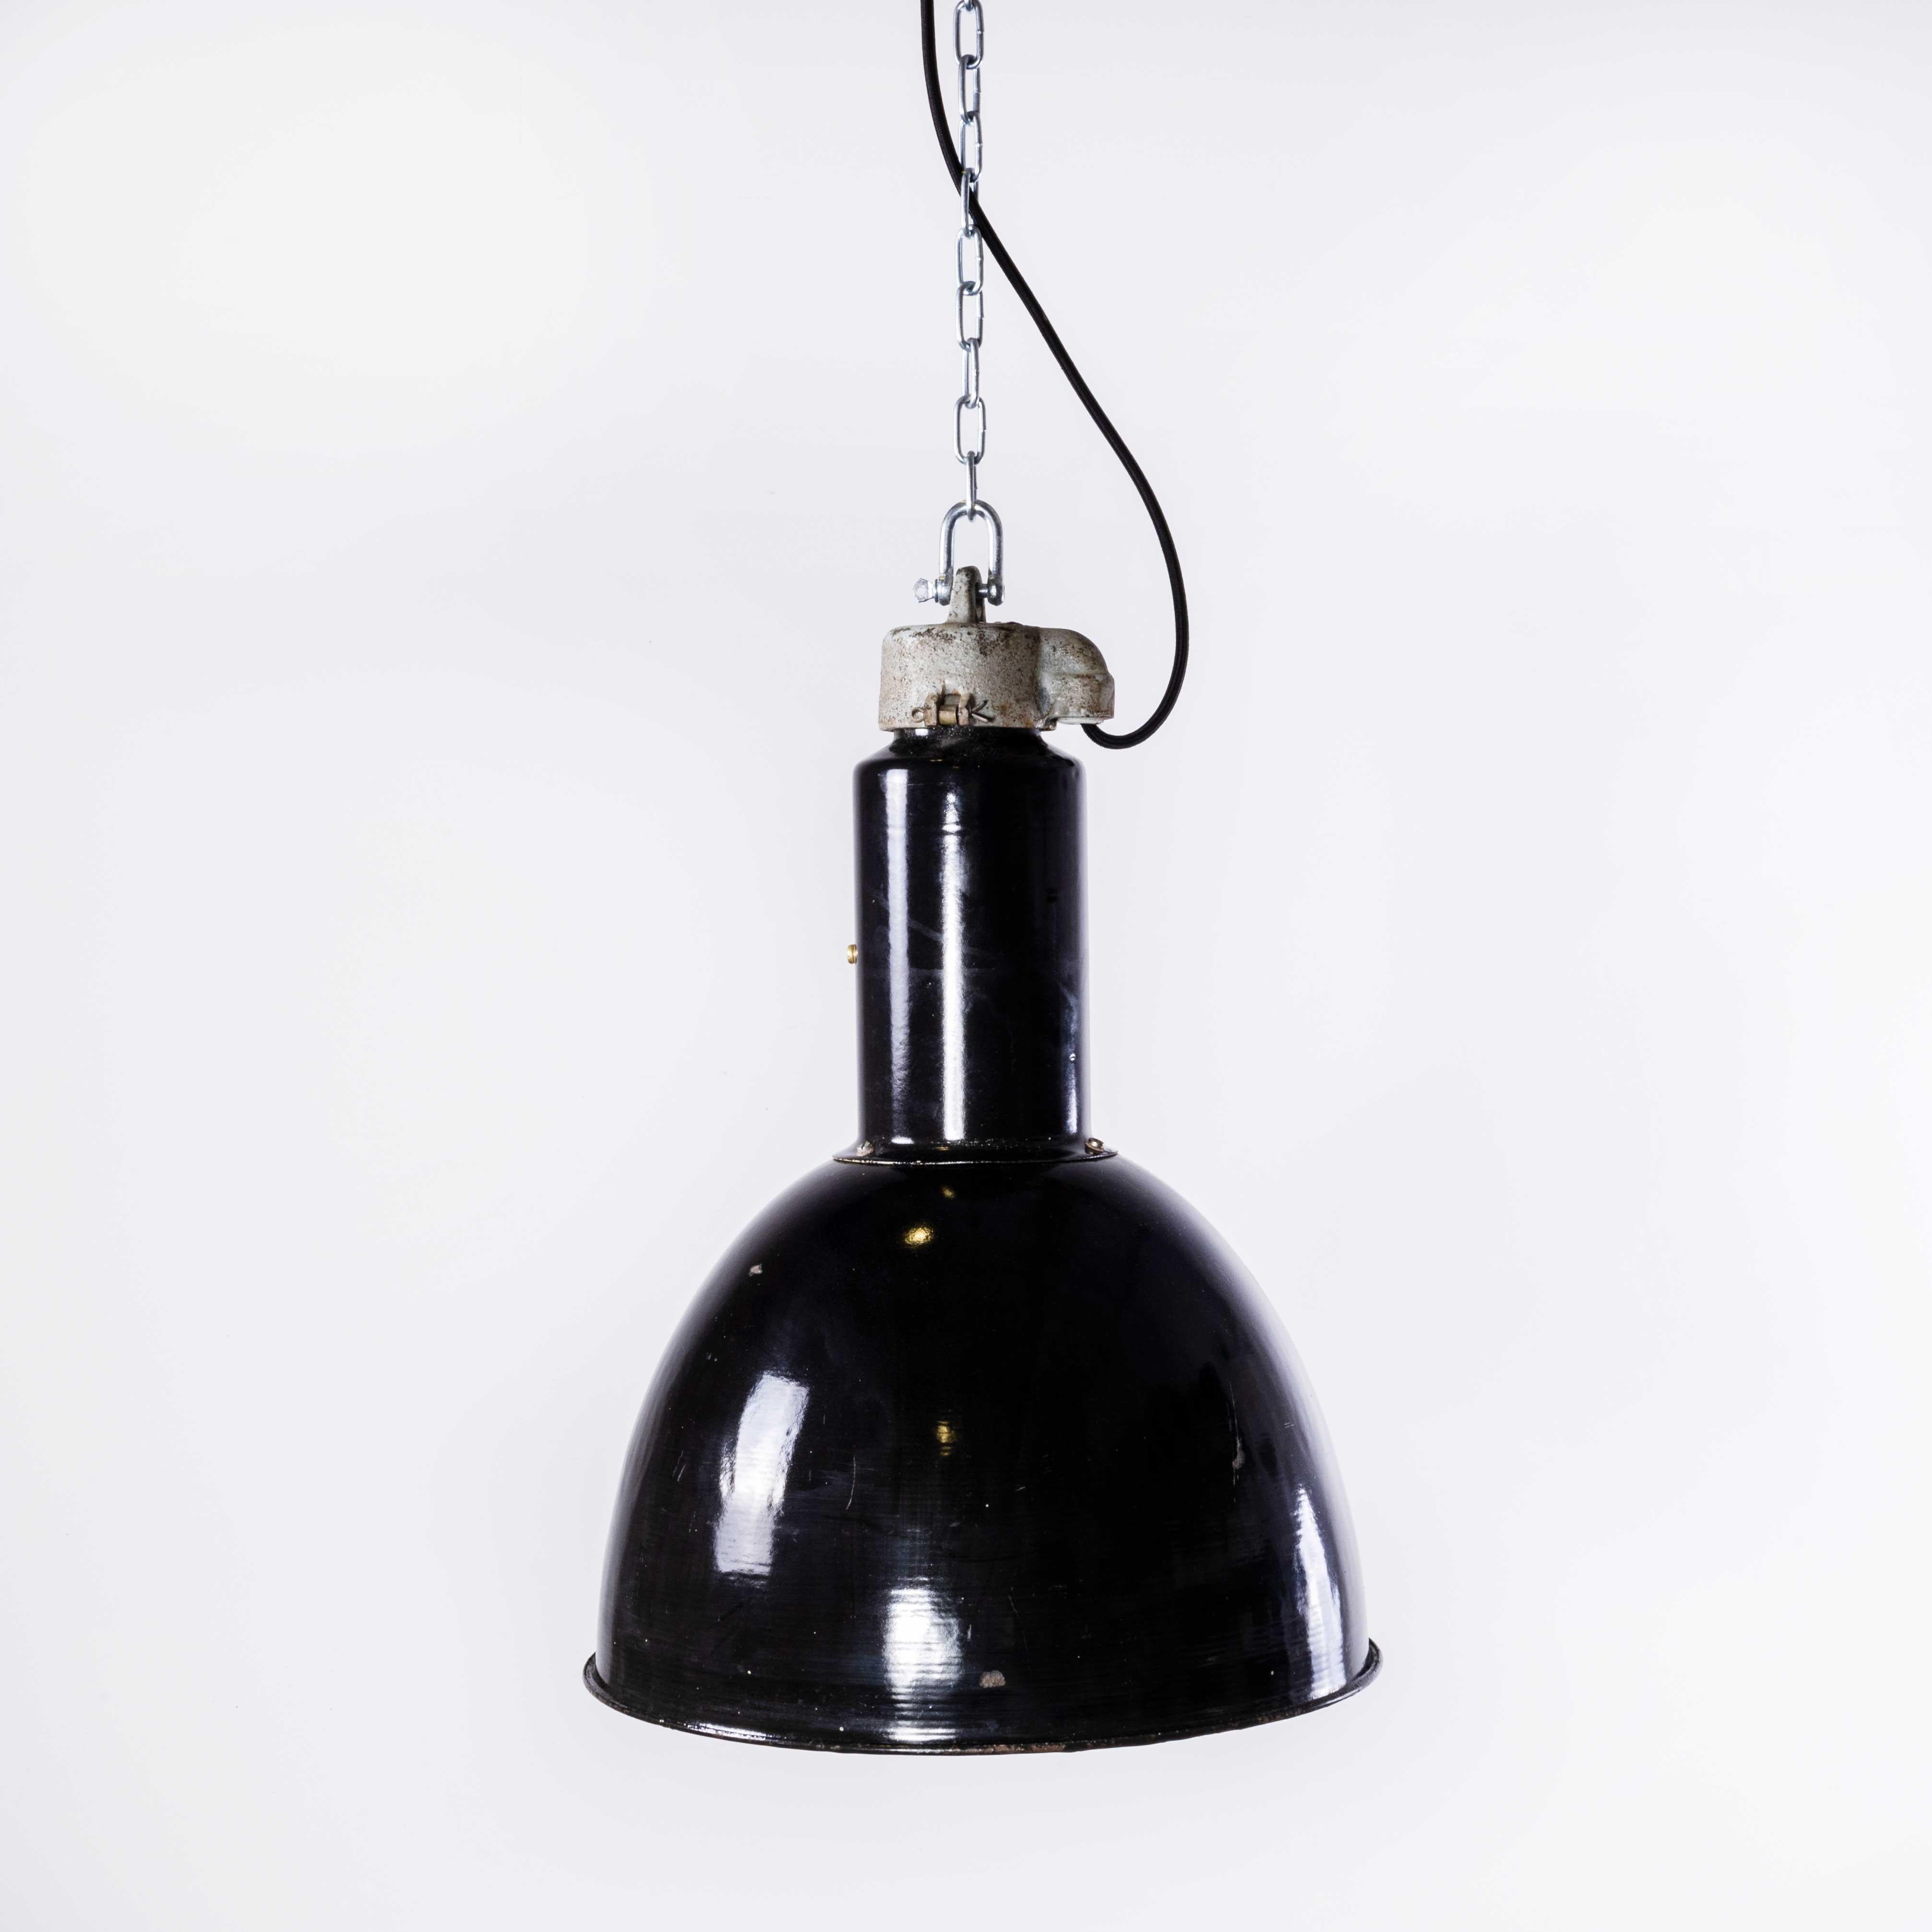 1930’s Large Industrial Black Enamel Bauhaus Ceiling Pendant Lamp
1930’s Large Industrial Black Enamel Bauhaus Ceiling Pendant Lamp. The key feature of these lamps is their heavy steel construction and cast metal tops. Each lamp has been cleaned and